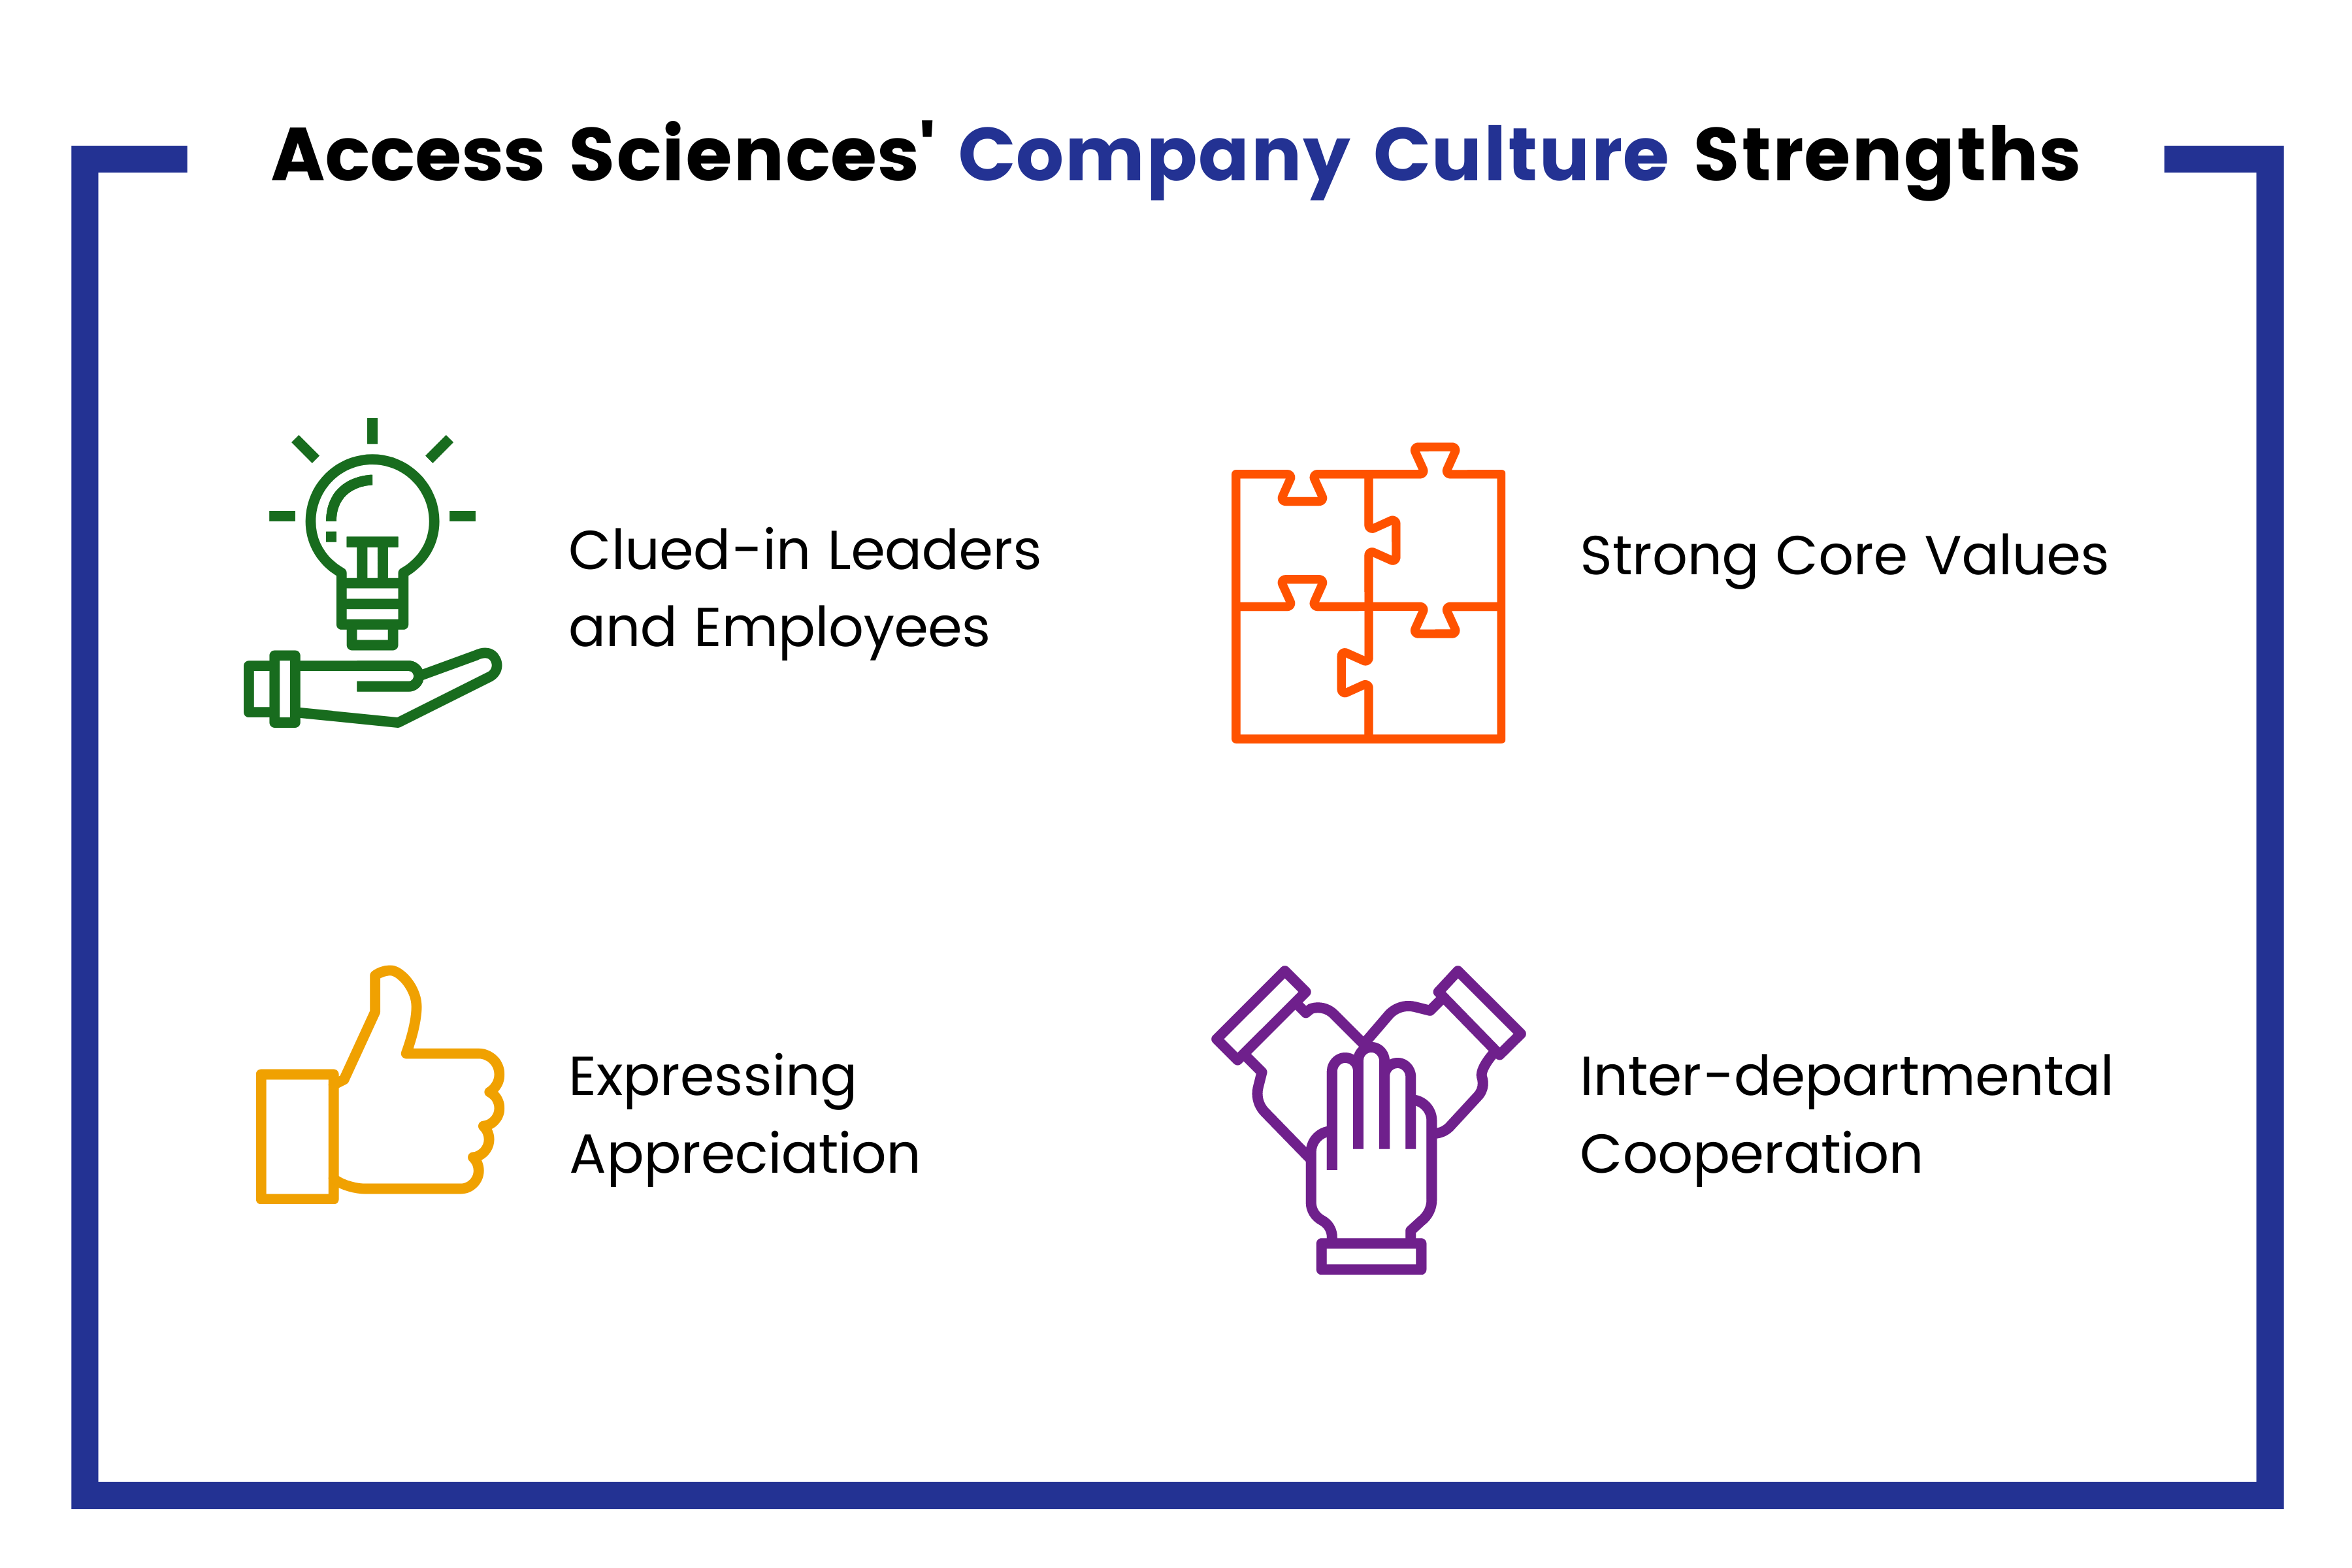 Access Sciences' Company Culture Strengths